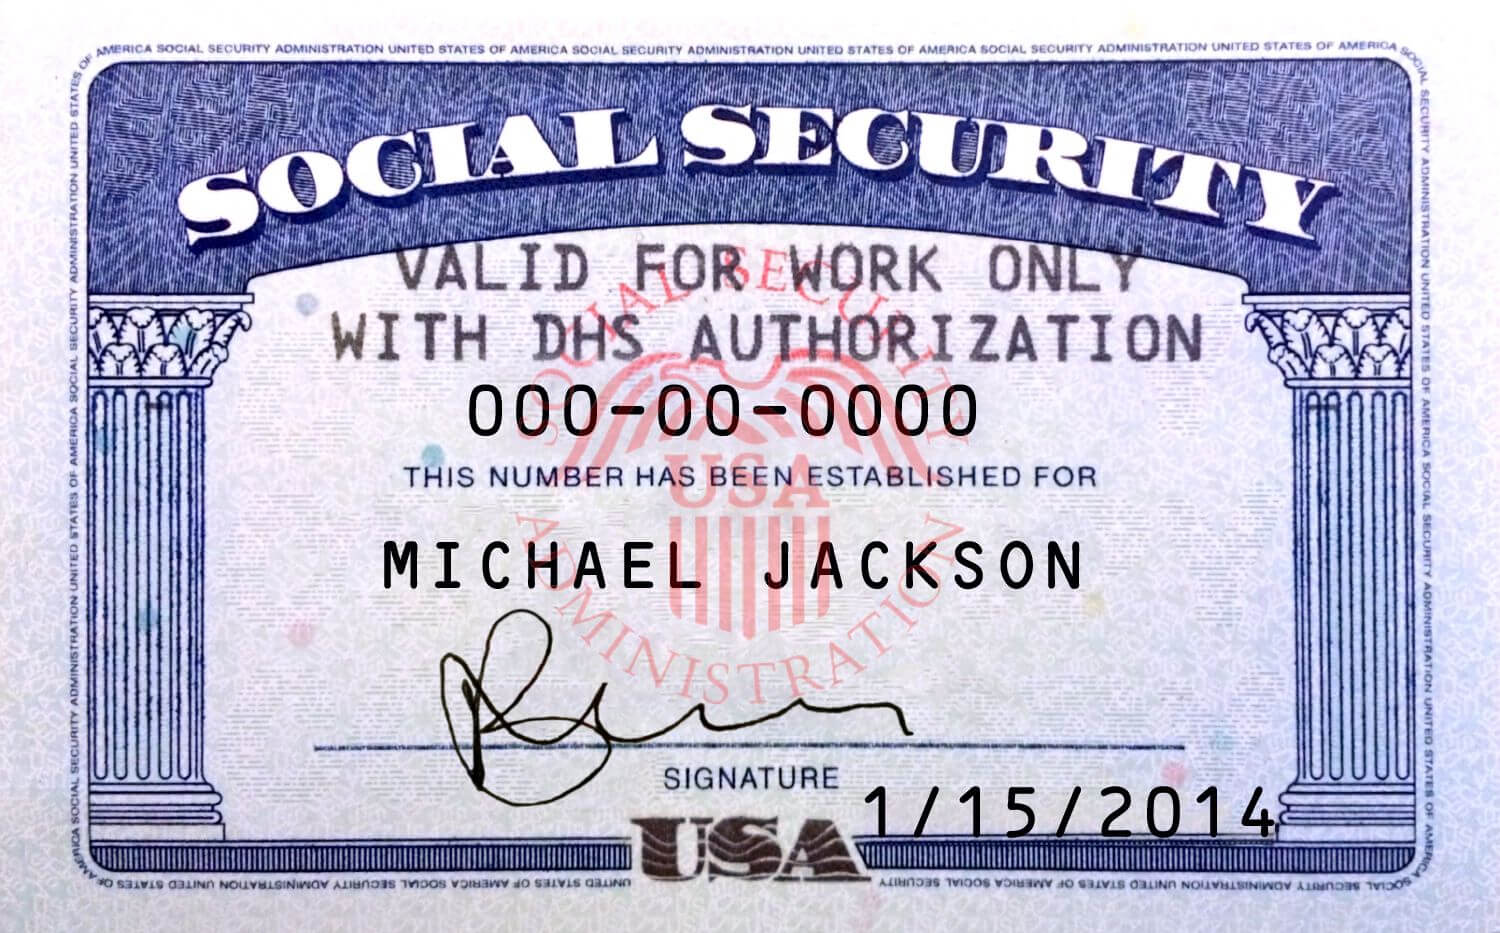 This Is Ssn Card (Usa) Psd (Photoshop) Template. On This Psd Pertaining To Social Security Card Template Psd